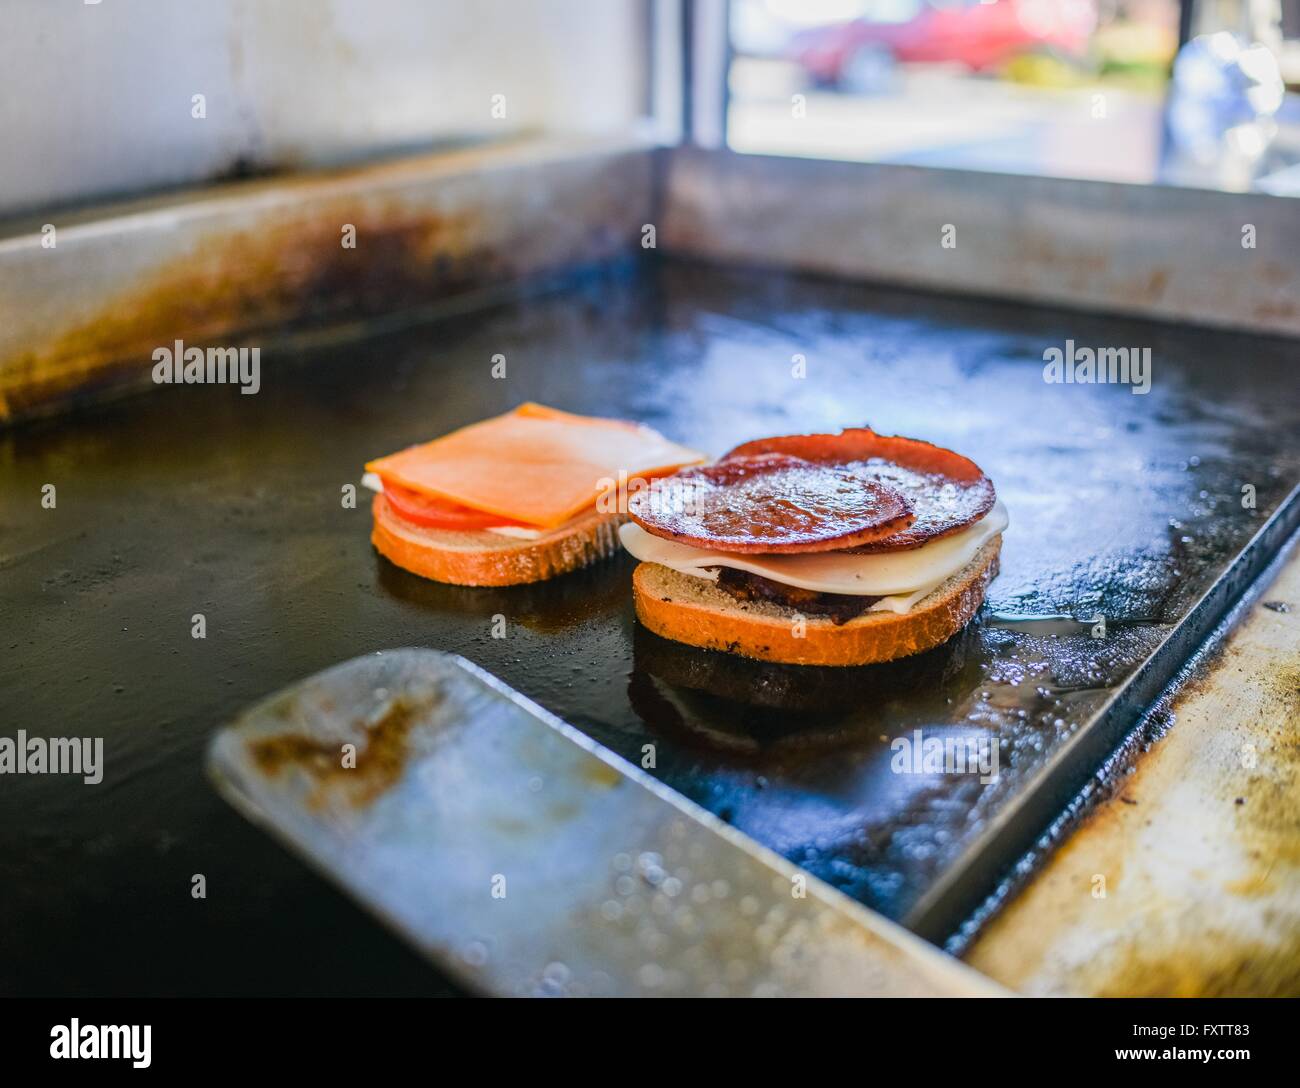 Pork roll sandwich cooking on catering van griddle Stock Photo